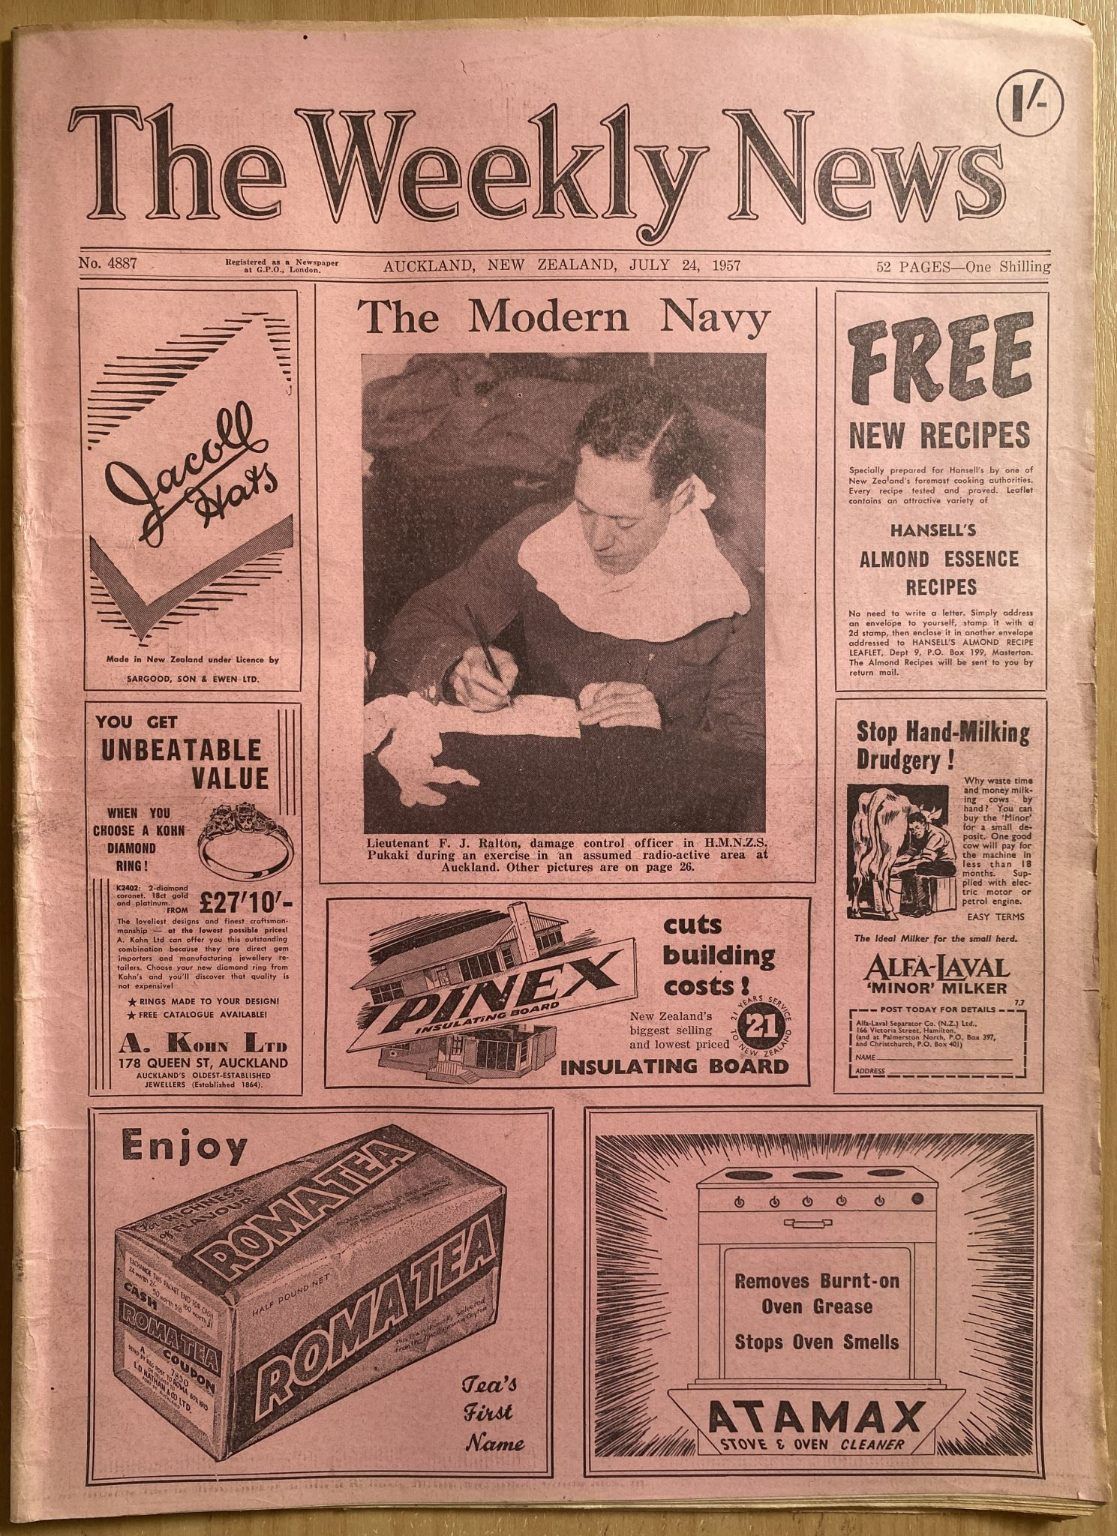 OLD NEWSPAPER: The Weekly News, No. 4887, 24 July 1957